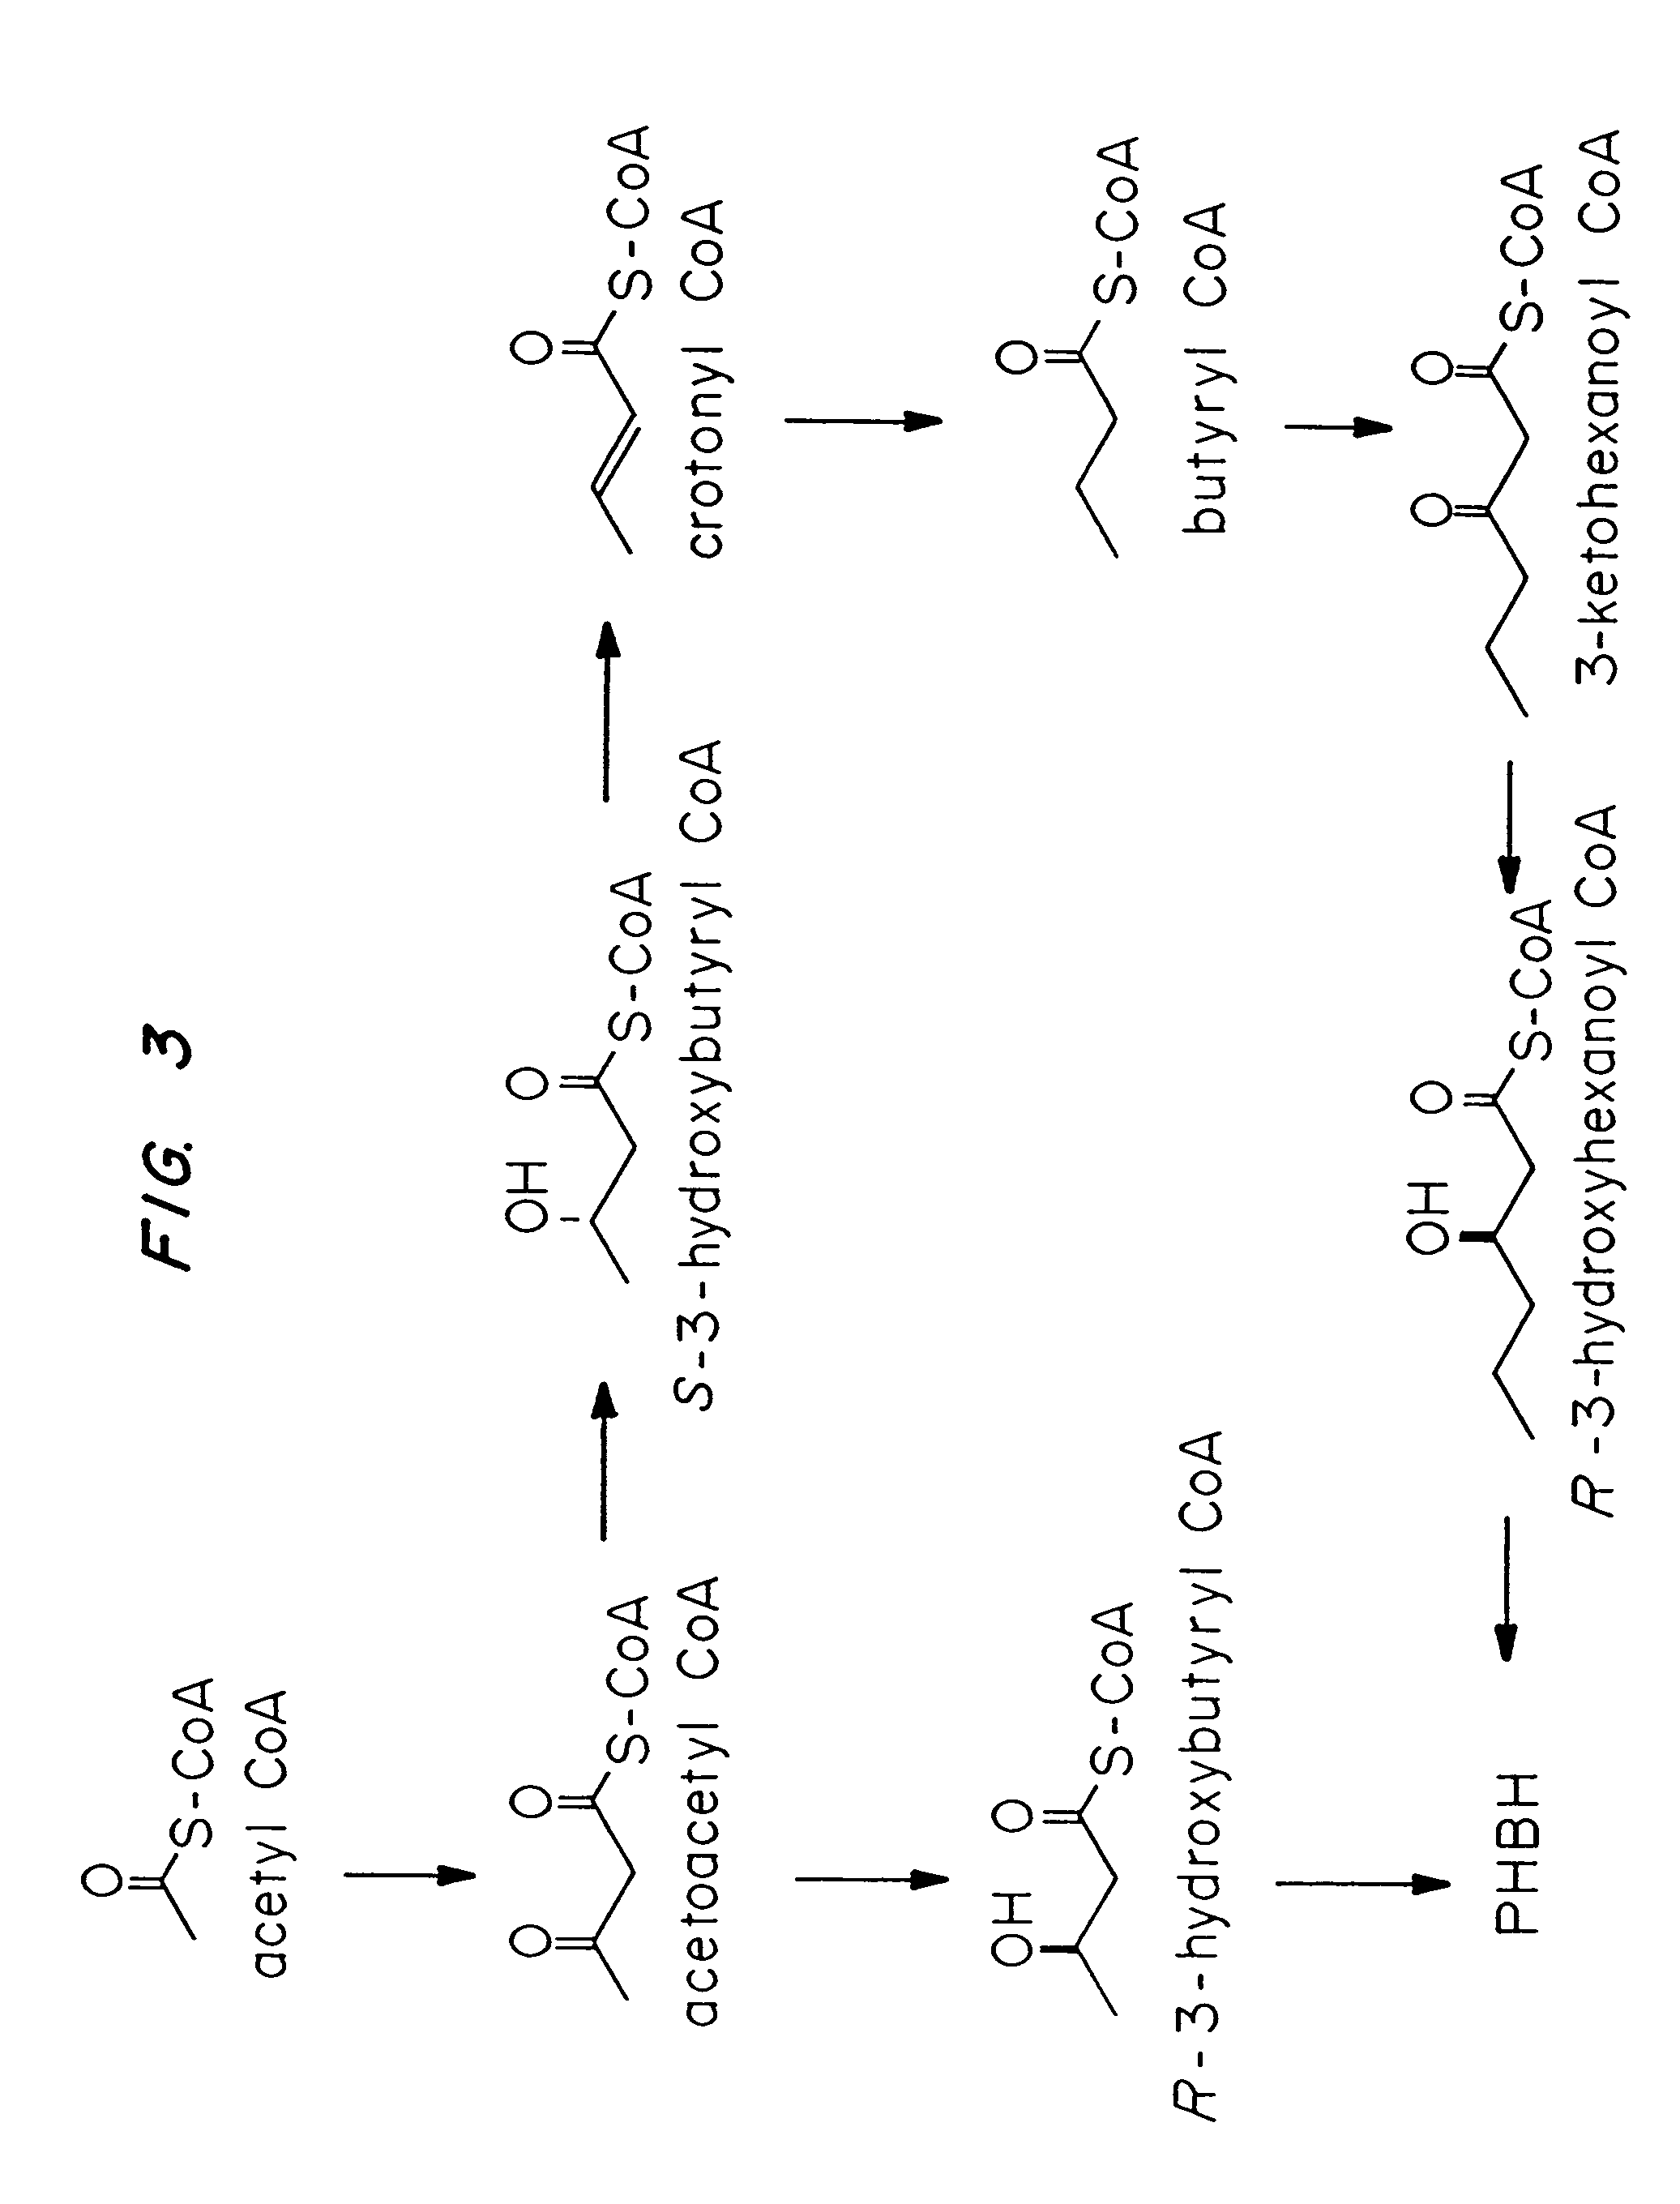 Transgenic systems for the manufacture of poly(2-hydroxy-butyrate-co-3-hydroxyhexanoate)